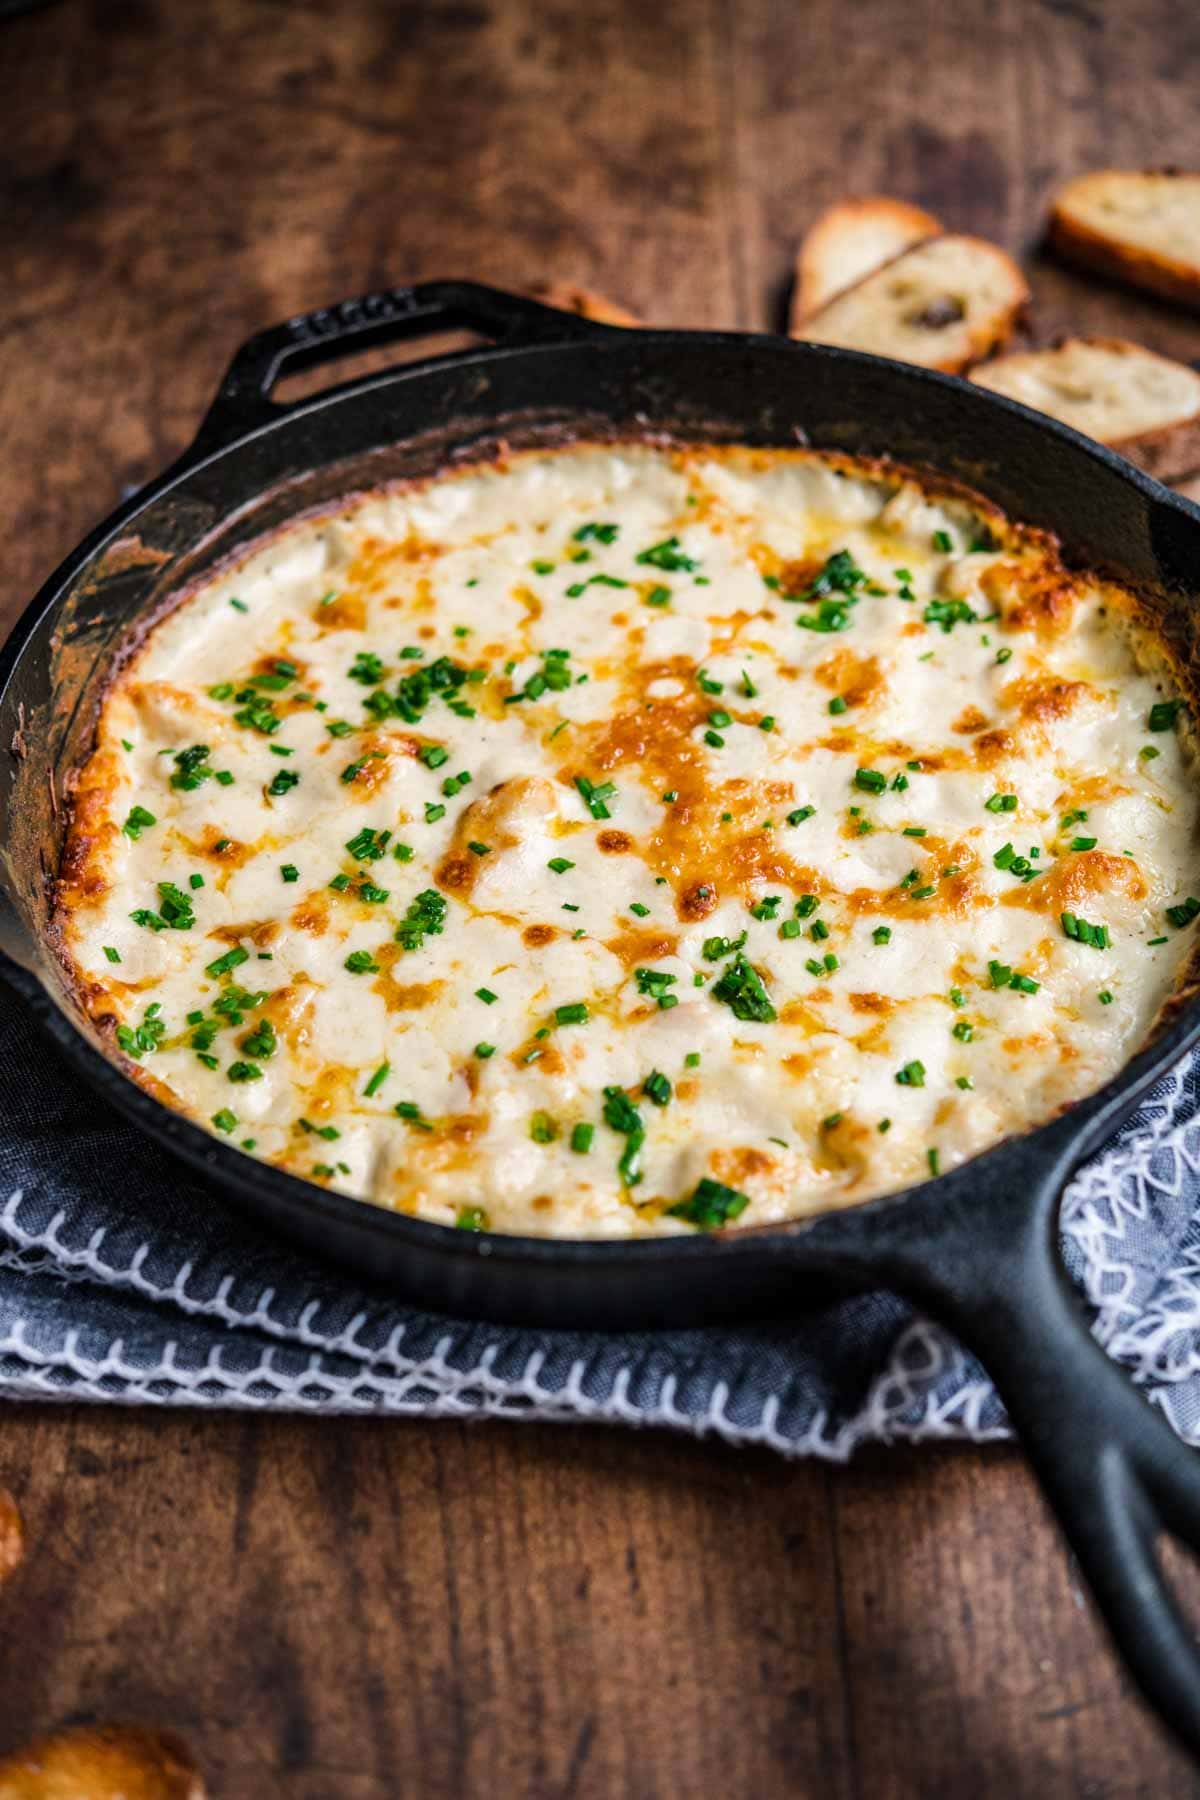 Garlic Shrimp Dip shrimp in skillet after baking with melted cheese and parsley garnish